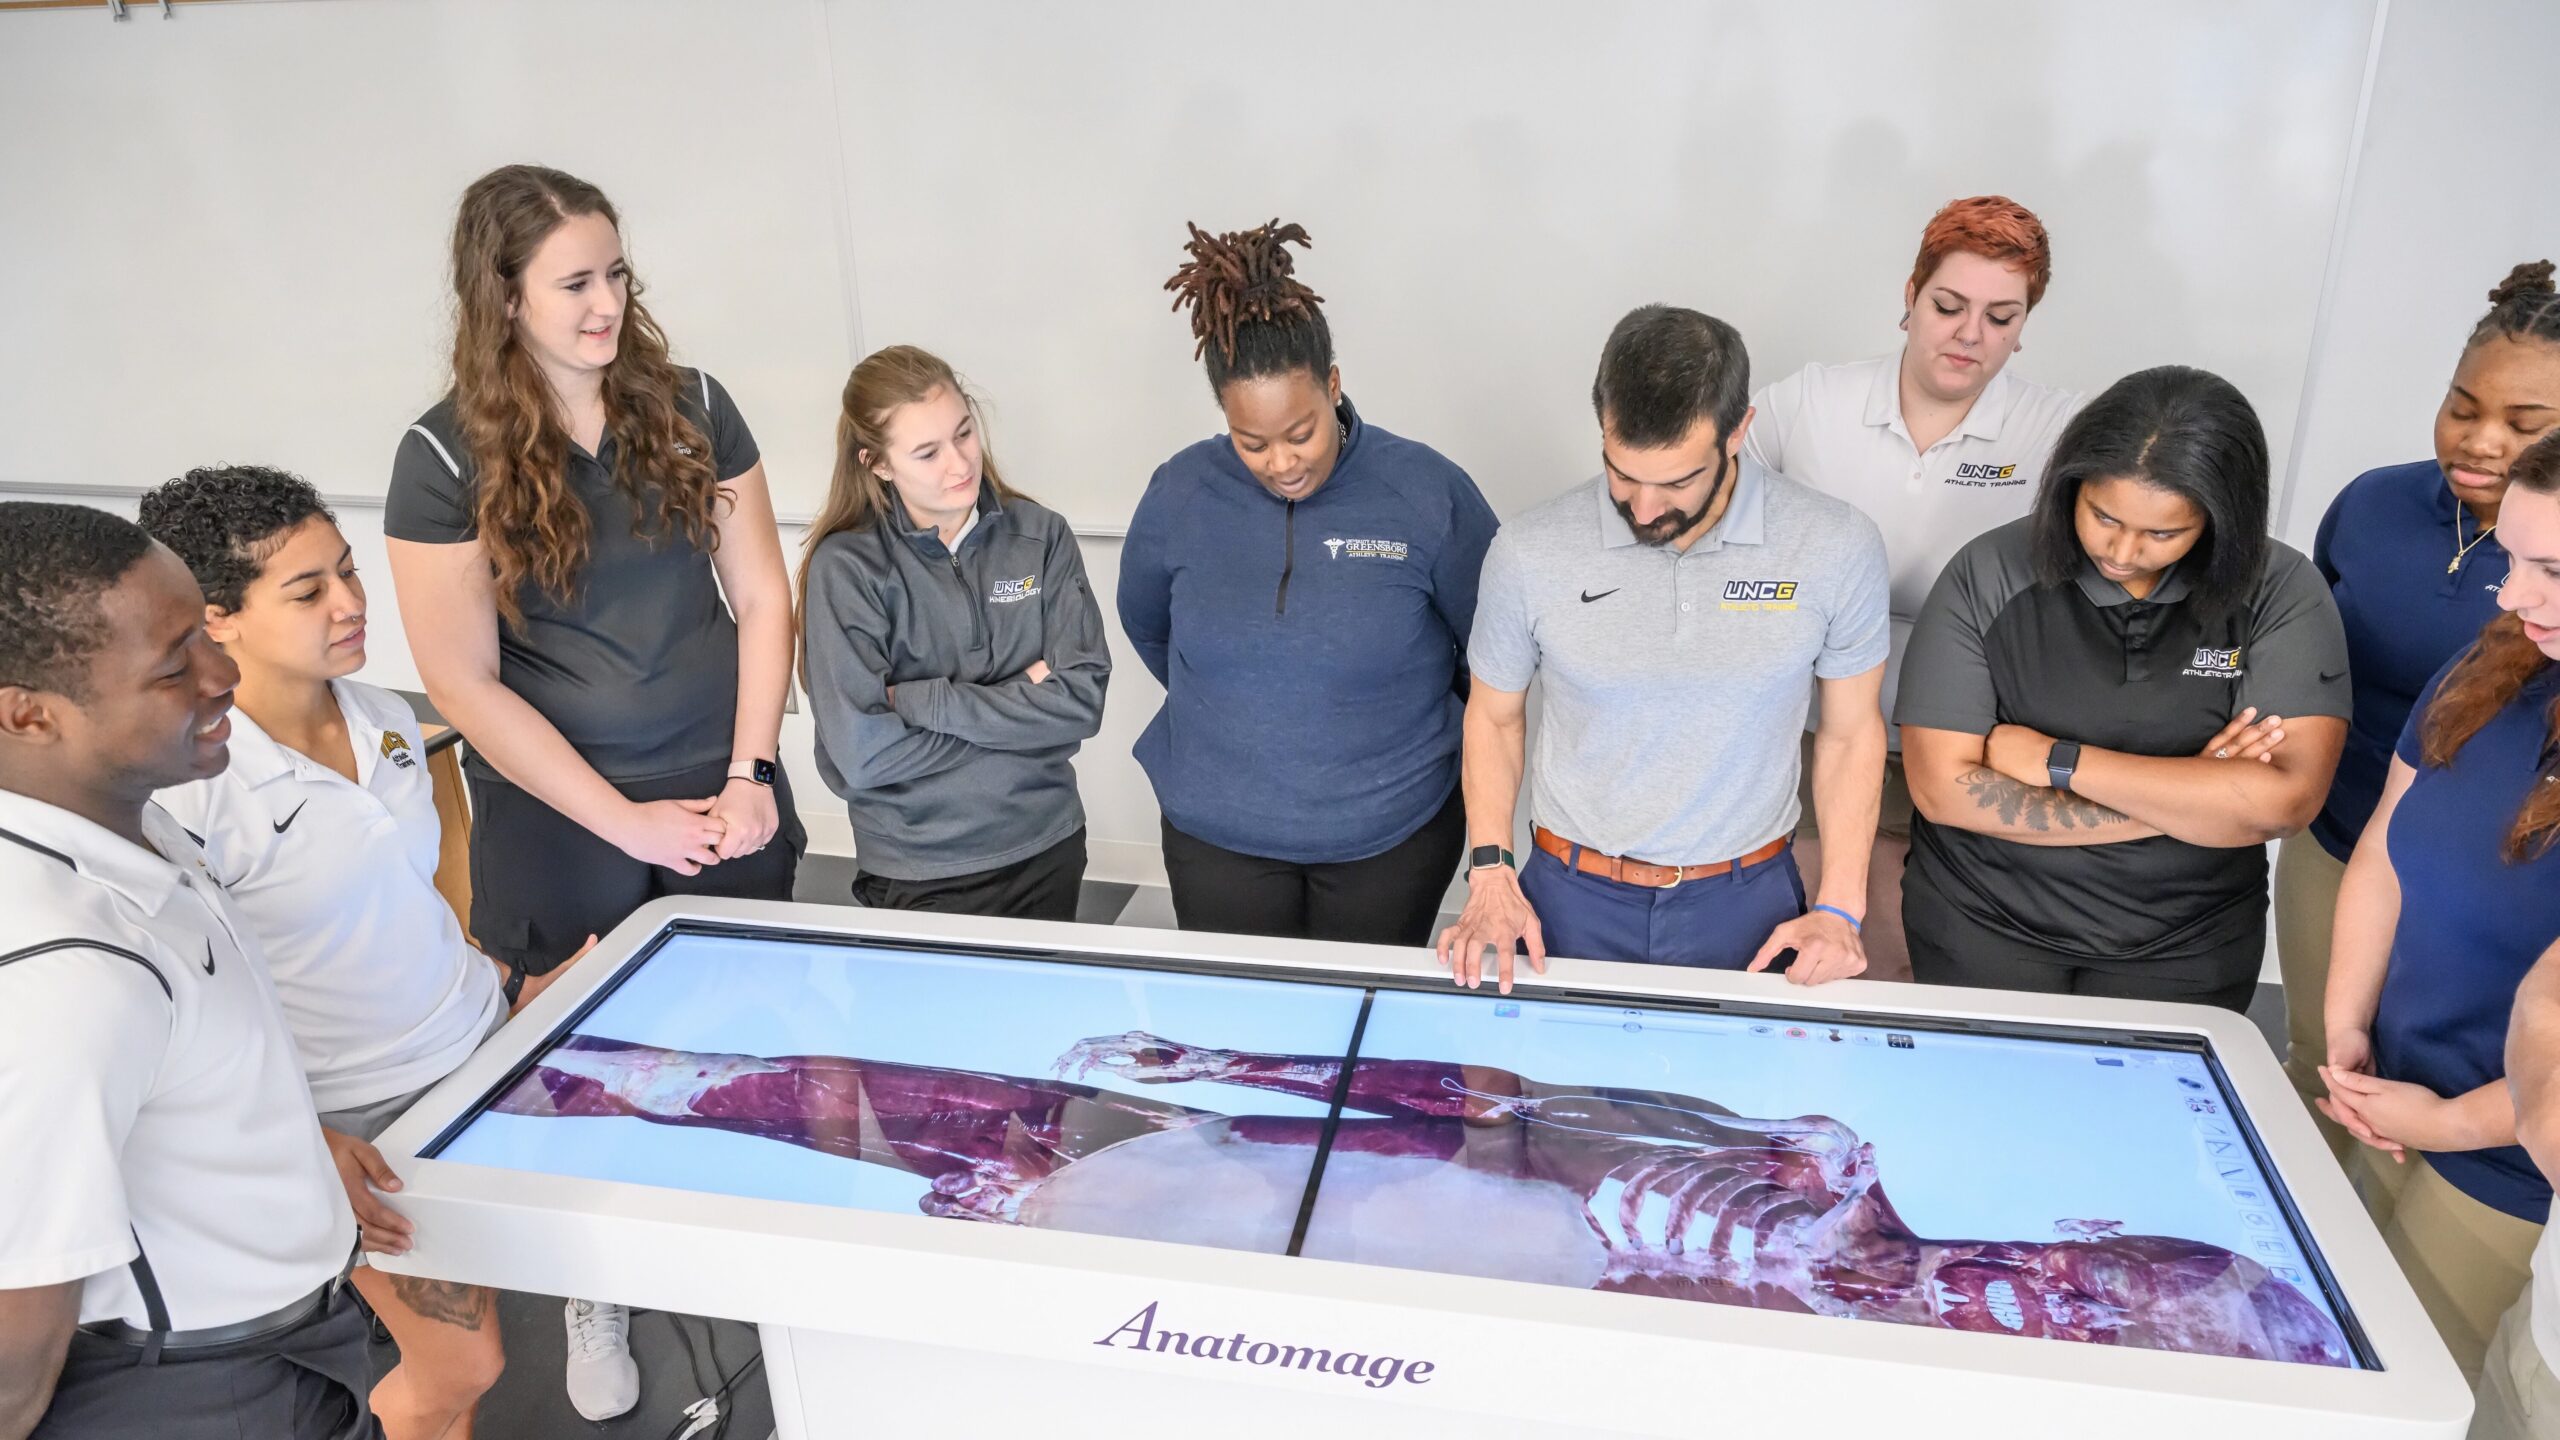 Anatomage table with faculty and students